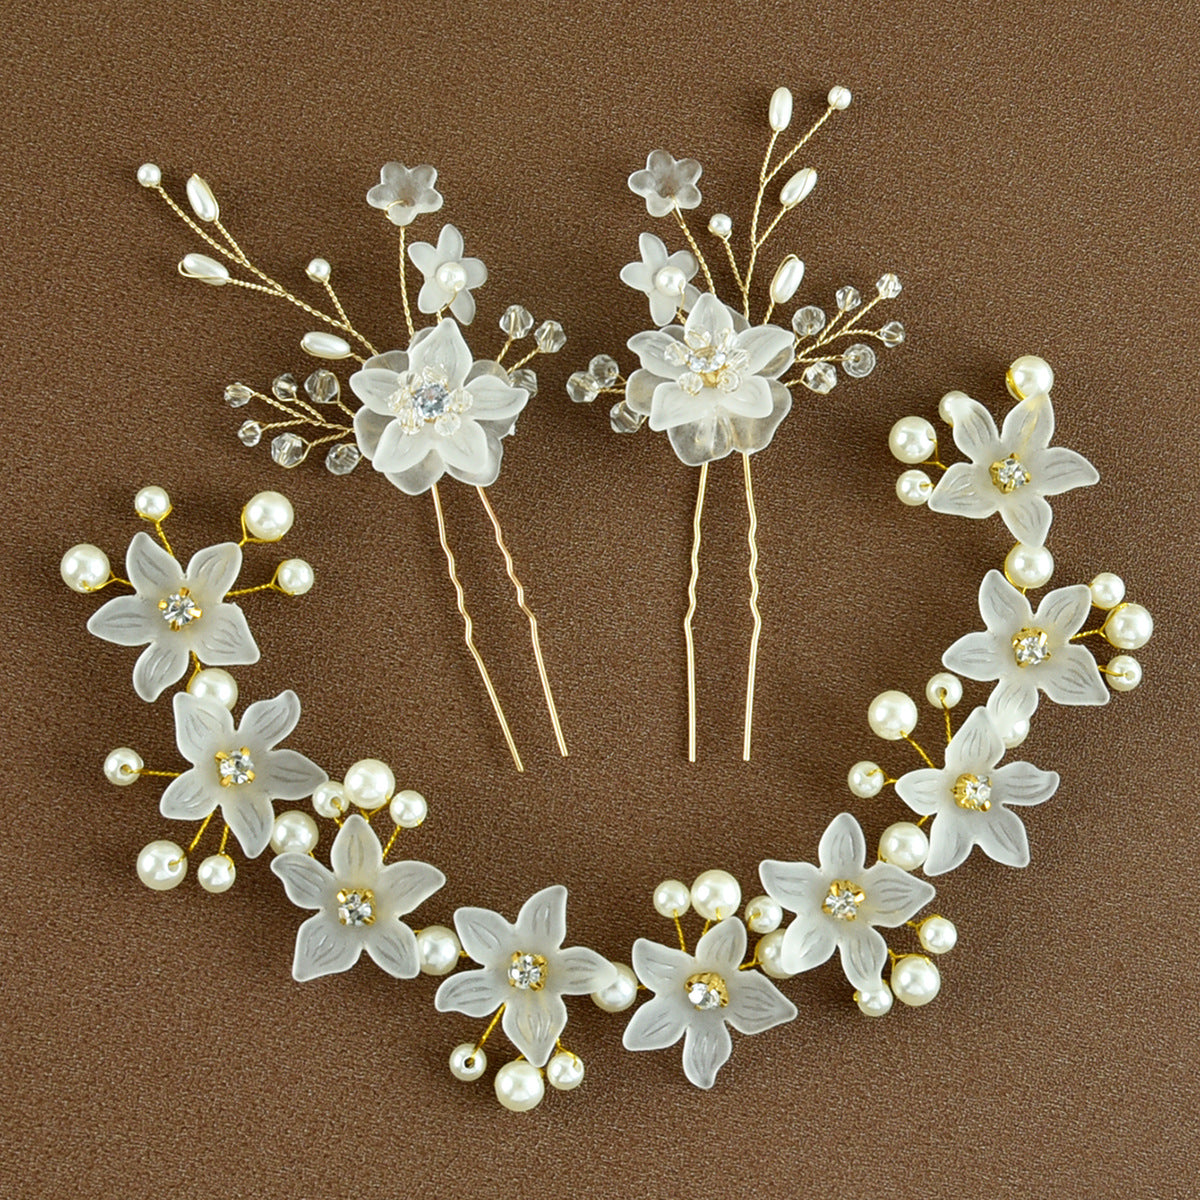 Bulk Hair Accessory Women Flower Pearl Hairpin Hair Band Sets for Wedding Party Gifts Wholesale